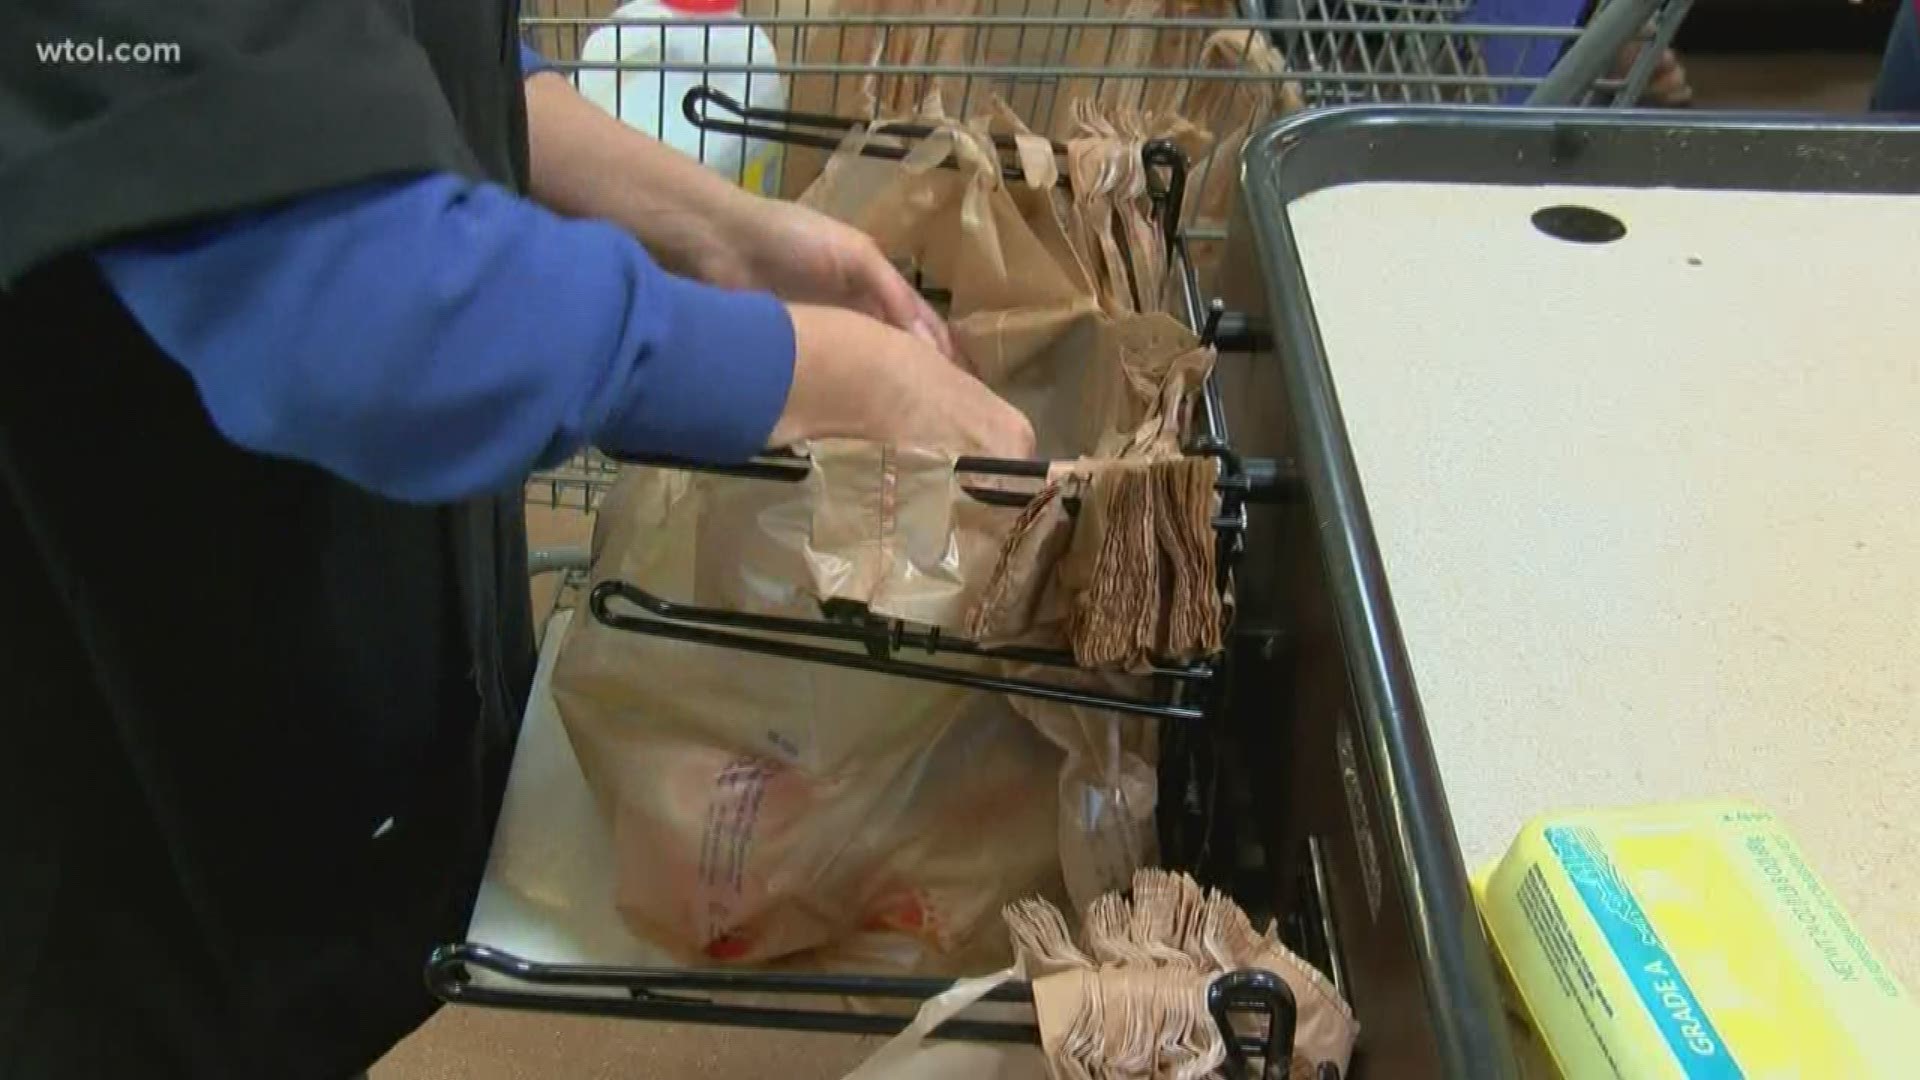 With majority support, Bowling Green City Council members will look closer at the legislation, enforcement and exceptions of a single-use plastic bag ban.